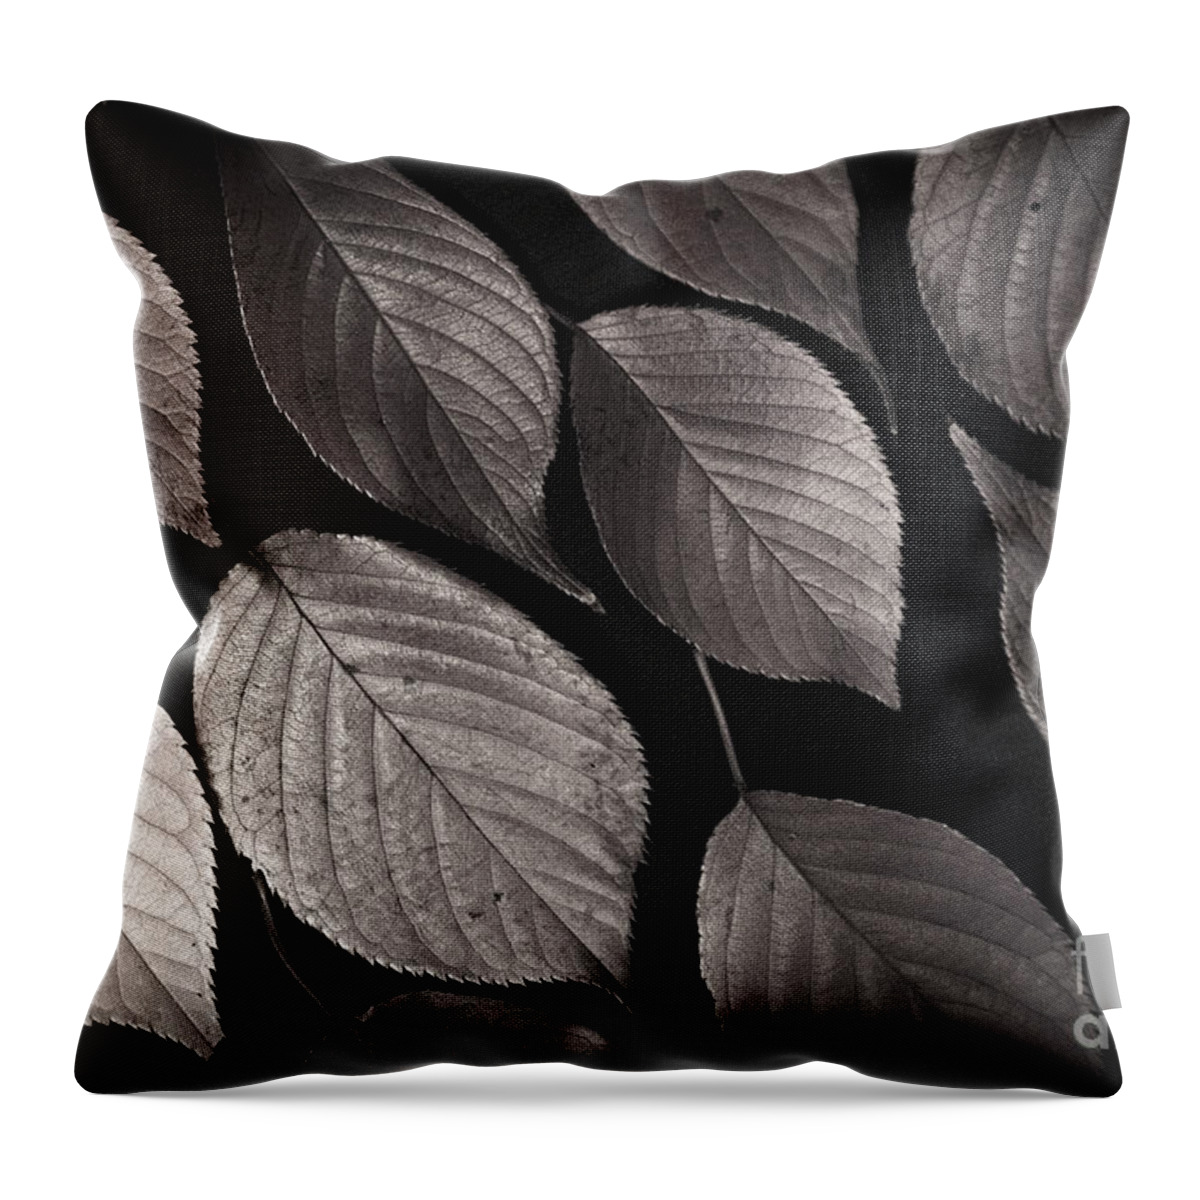 Leaves Throw Pillow featuring the photograph Autumn Leaves by Eena Bo